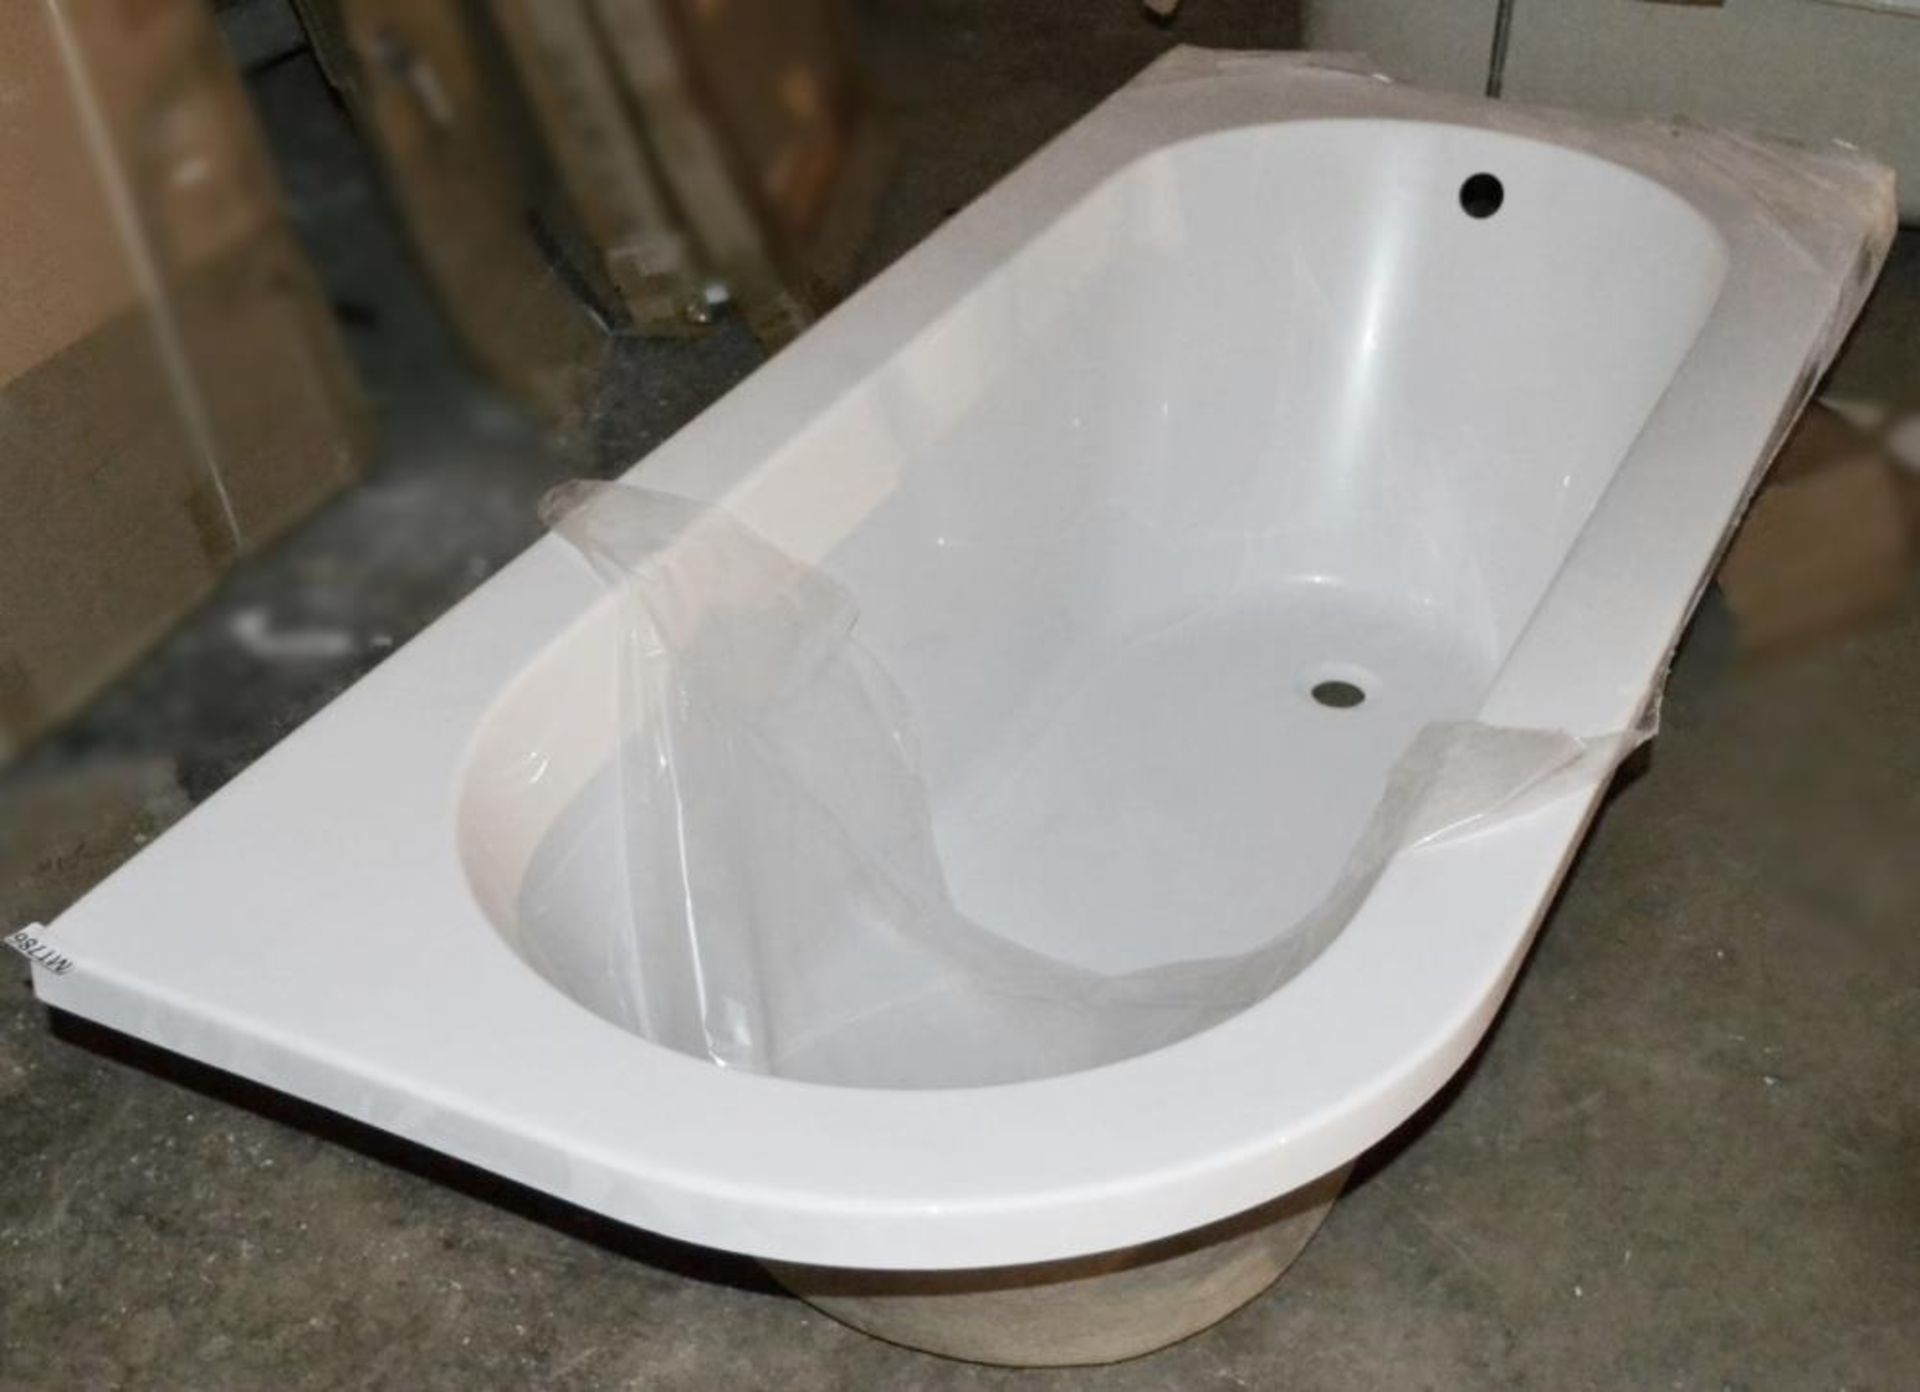 1 x Cayman D-Shaped Back To Wall Right-Hand Acrylic Bath - New / Unused Stock - Dimensions: 1700 x 7 - Image 3 of 5